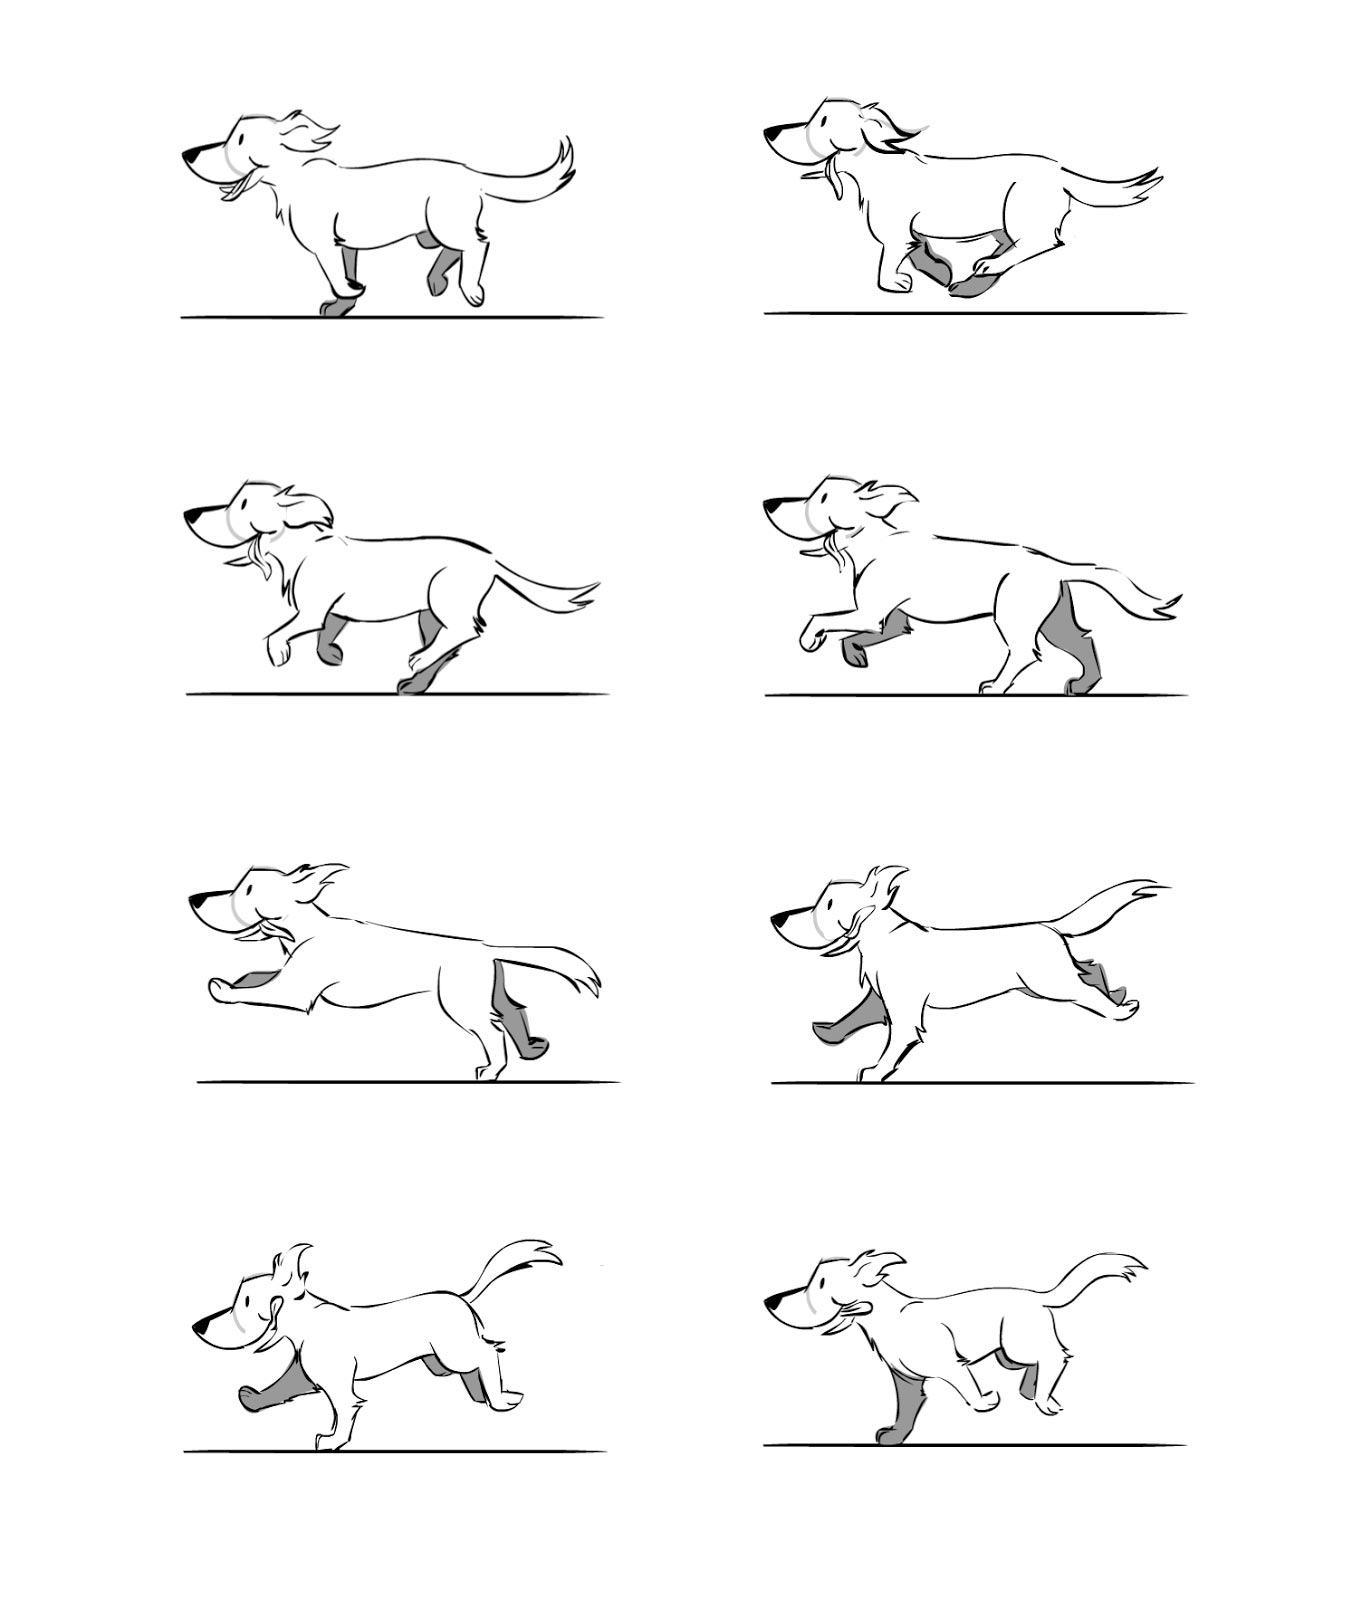 Dog drawing reference